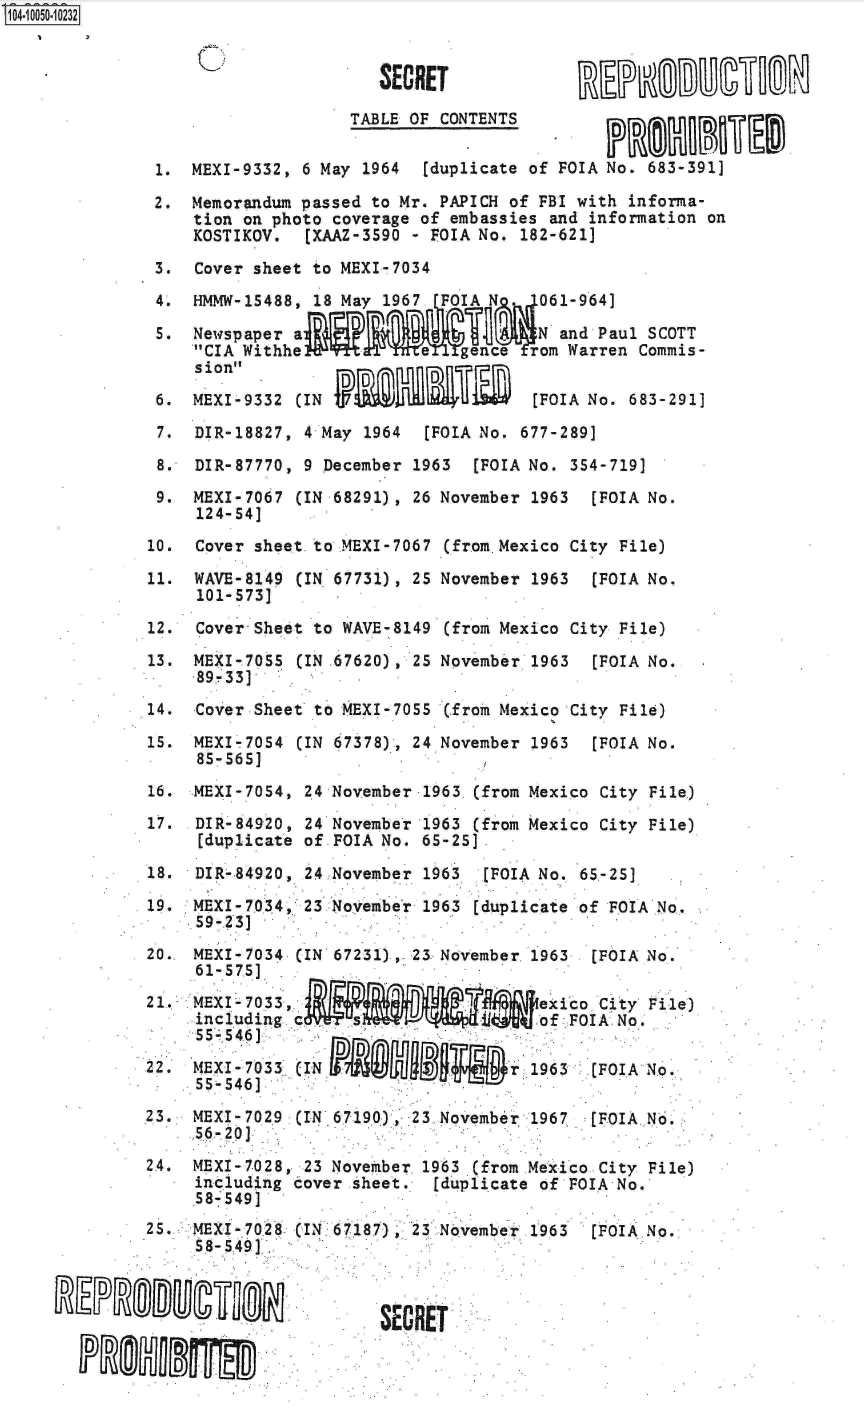 handle is hein.jfk/jfkarch00008 and id is 1 raw text is: 104-10050-10232


                                     SECRET

                                  TABLE OF CONTENTS

               1. MEXI-9332,  6 May 1964  (duplicate of FOIA No. 683-391]

               2. Memorandum passed to Mr. PAPICH of FBI with informa-
                   tion on photo coverage of embassies and information on
                   KOSTIKOV.  [XAAZ-3590 - FOIA No. 182-621]

               3.  Cover sheet to MEXI-7034
               4.  HMMW-15488, 18 May 1967 FOIA N    061-964]

               S.  Newspaper a                       N and Paul SCOTT
                   CIA Withhe            e  gence  rom Warren Commis-
                   sion
               6.  MEXI-9332 (IN                     [FOIA No. 683-291]
               7.  DIR-18827, 4 May 1964  [FOLA No. 677-289]

               8.  DIR-87770, 9 December 1963  [FOIA No. 354-719]

               9.  MEXI-7067 (IN 68291), 26 November 1963 [FOIA No.
                   124-54]
              10.  Cover sheet to MEXI-7067 (from.Mexico City File)

              11.  WAVE-8149 (IN 67731), 25 November 1963 [FOIA No.
                   101-573]
              12.  Cover Sheet to WAVE-8149 (from Mexico City File)

              13.  MEXI-7055 (IN 67620), 25 November 1963  [FOIA No.
                   89-33]

             .14.  Cover Sheet to MEXI-7055 (from Mexico City File)
             15.   MEXI-7054 (IN 67378)., 24 November 1963 [FOIA No.
                   85-565]
              16.  MEXI-7054, 24 November 1963.(from Mexico City File)
              17.  DIR-84920, 24 November 1963 (from Mexico City File)
                   (duplicate of FOIA No. 65-25]
              18.  DIR-84920, 24 November 1963  (FOIA No., 65-25]

              19.  MEXI-7034  23 November 1963 [duplicate of FOIA No.
                   59-23]
              20.  MEXI-7034 (IN 67231),. 23 November 1963 [FOIA No.
                   61-575]
              21.  MEXI-7033                         exico City File)
                  including~c     -                  of: FOUA No
                  55-546]I
              22.  MEXI-7033 (IN                    1963   FOIA No.
                   55-546]

              23.  MEXI-7029 (IN 67190), 23 November 1967 (FOIA N6.
                   .56-20]
              24.  MEXI-7028, 23 November 1963 (from Mexico City File)
                   including cover sheet.  (duplicate of FOIA No.
                   S8-549]
              25.  MEXI-7028 (IN 67187  23 November 1963  (FOIA No.

                   58-C49E


